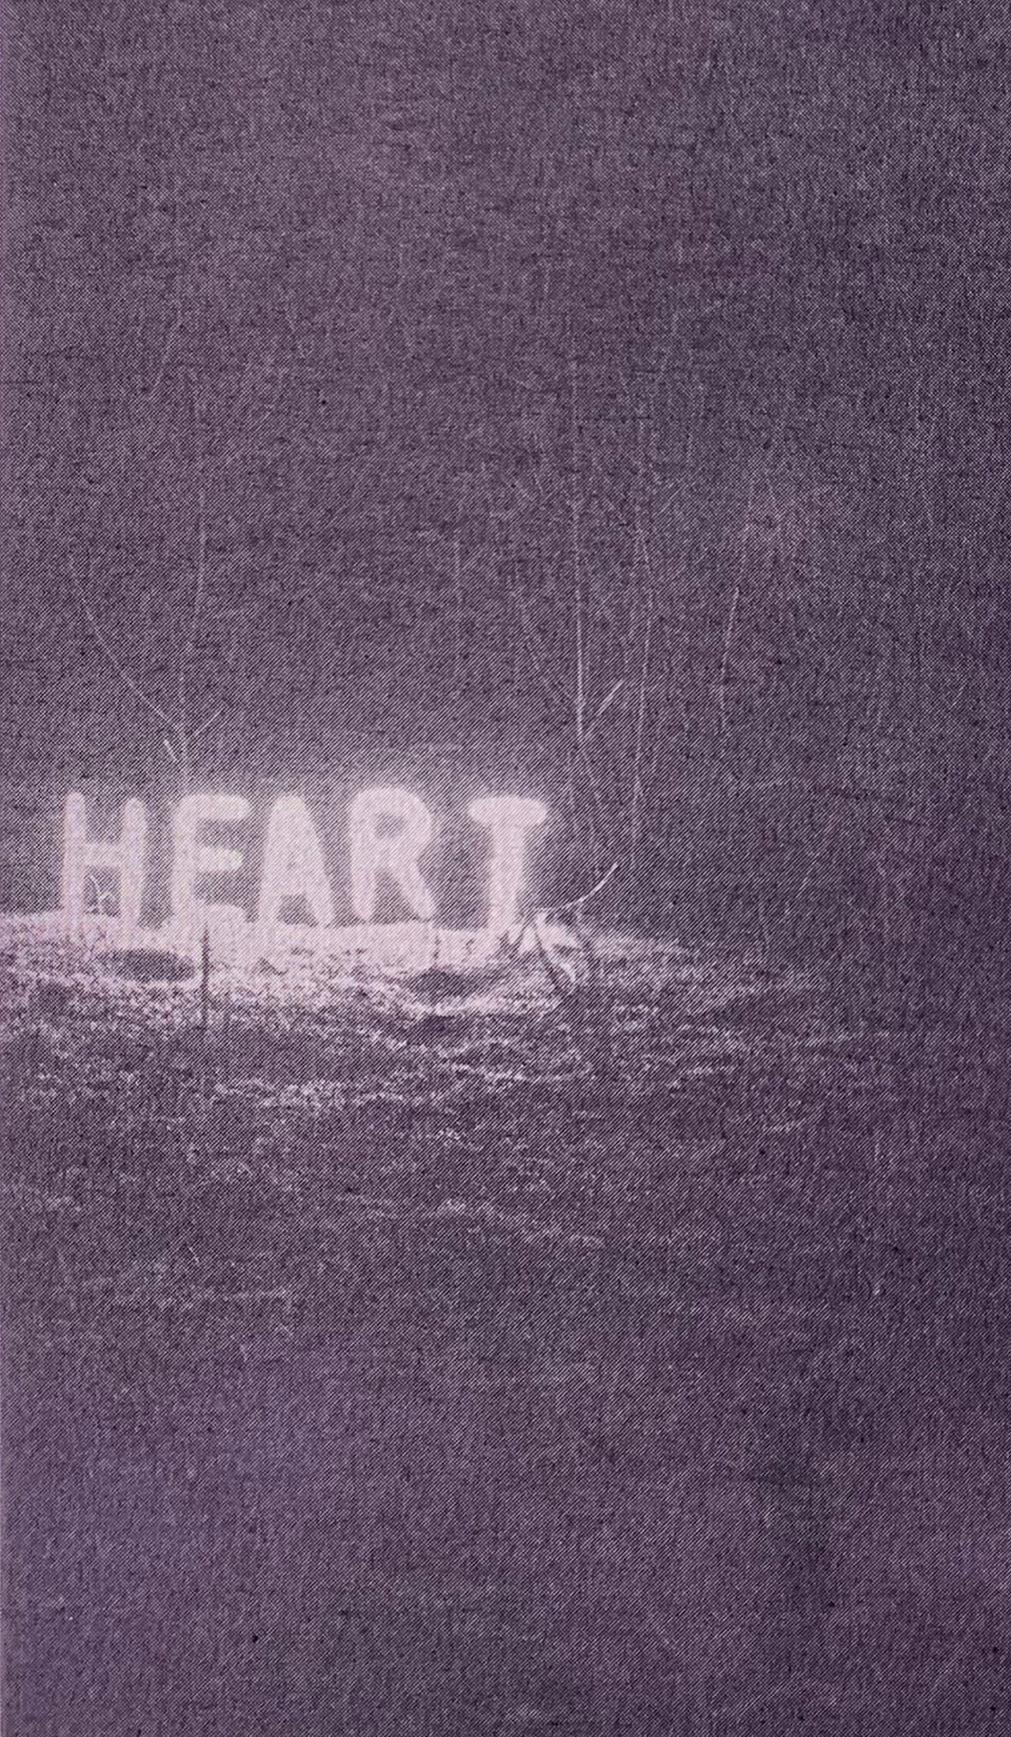 Jung LEE (*1972, South Korea)
Heart (Purple), 2021
Polymer Photogravure
Image 42 x 29.9 cm (16 1/2 x 11 5/8 in.) 
Sheet 62 x 50.5 cm (24 3/8 x 19 7/8 in.)
Frame 68 x 56,5 x 4 cm (26 3/4 x 22 1/4 x 1 5/8 in.)
Edition of 15 plus 3 AP; Ed. no.